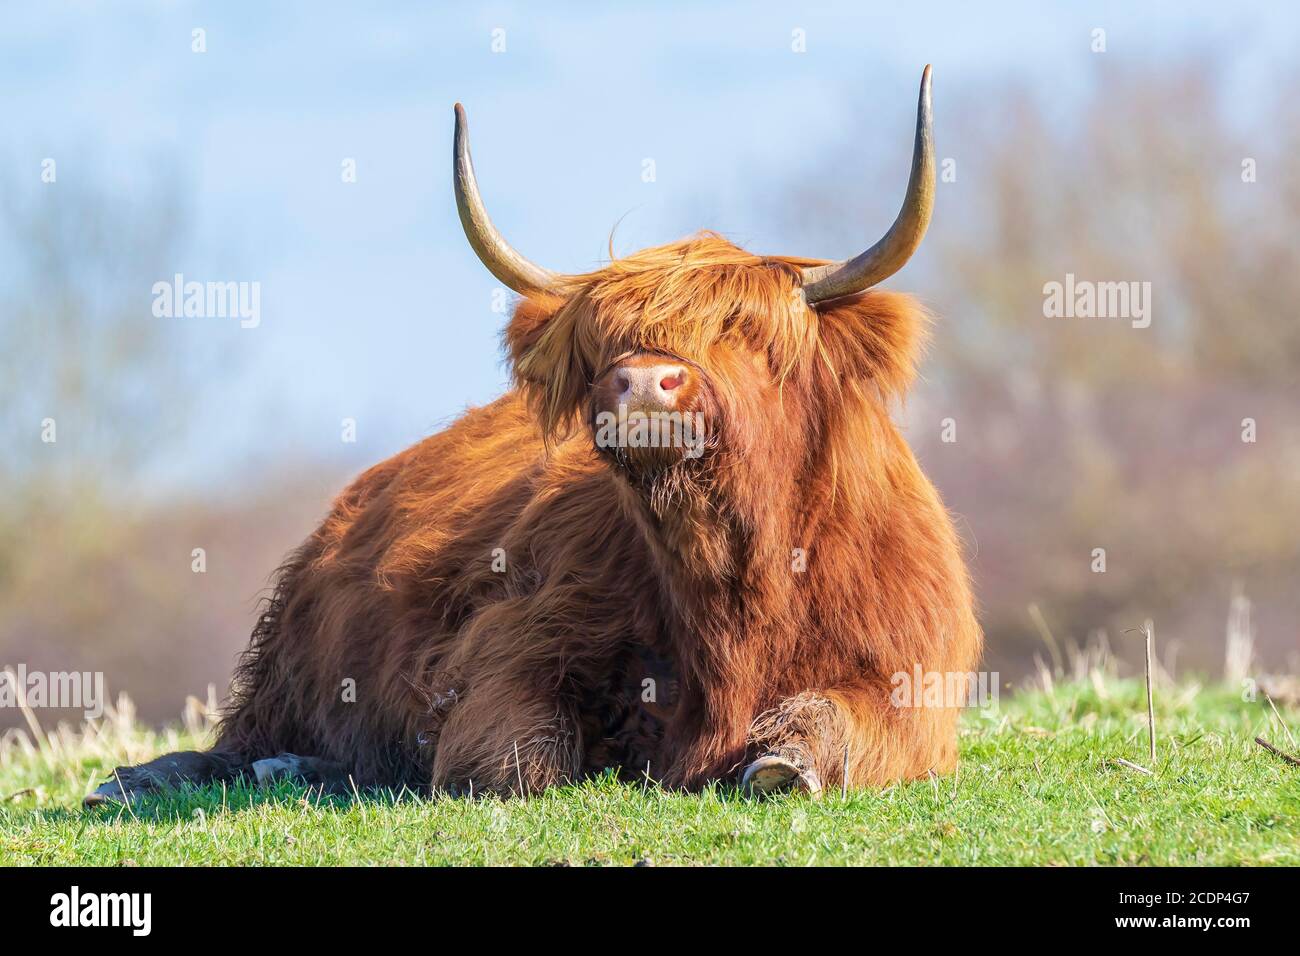 Closeup of brown red Highland cattle, Scottish cattle breed Bos taurus with long horns resting in grassland Stock Photo